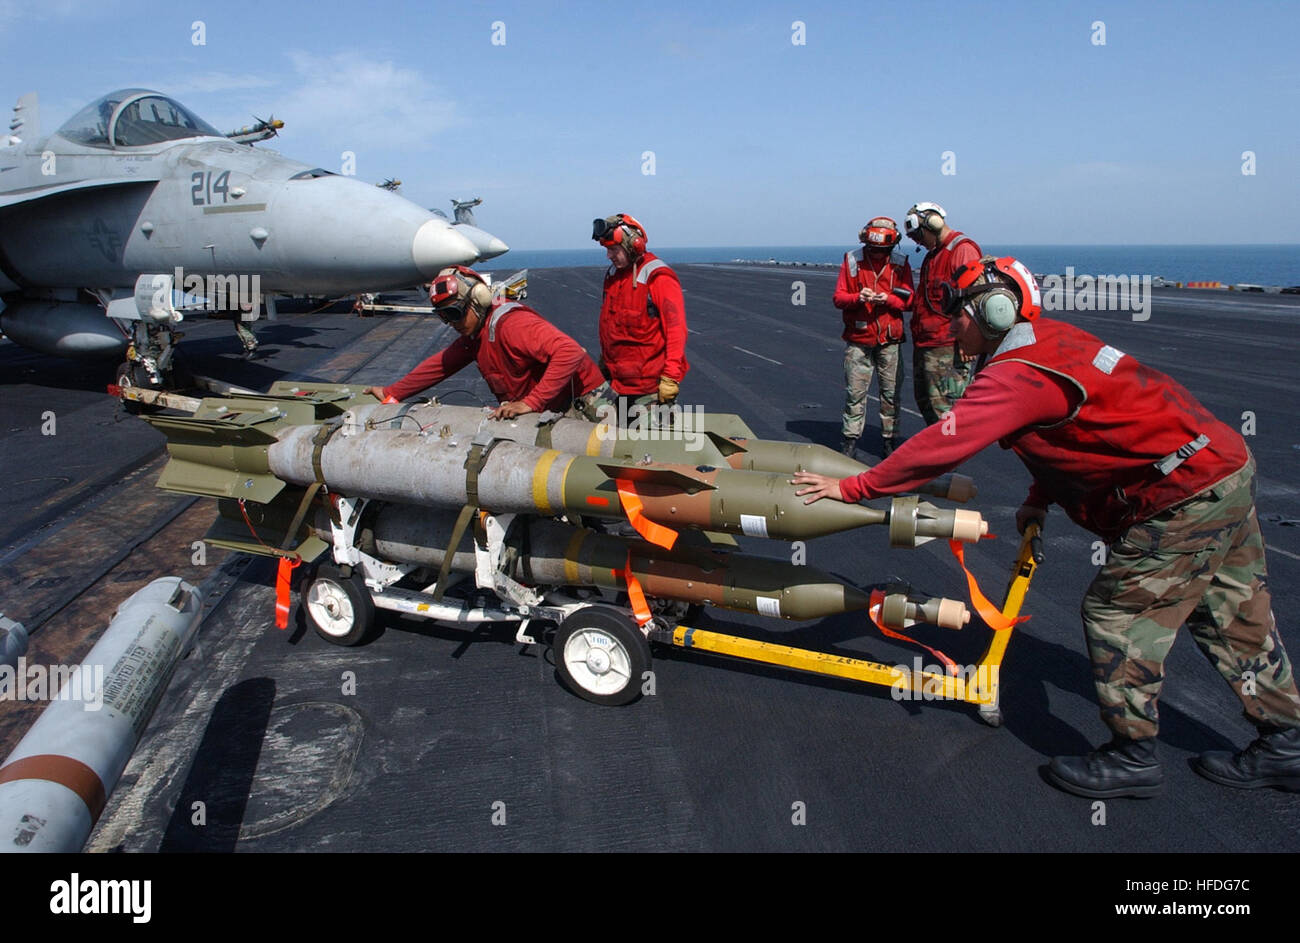 020303-N-4768W-026   At sea aboard USS John C. Stennis (CVN 74), Mar. 3, 2002 - U.S. Marine ordnance handlers load a 500-pound GBU-12 MK 83 laser guided bomb onto an F/A-18 'Hornet' strike fighter assigned to the 'Black Knights' of Marine Fighter Attack Squadron Three One Four (VMFA-314).  John C. Stennis and Carrier Air Wing Nine (CVW-9) are conducting combat missions over Afghanistan in support of Operation Enduring Freedom.  U.S. Navy photo by Photographer's Mate 3rd Class Joshua Word. (RELEASED) US Navy 020303-N-4768W-026 Loading bombs on aircraft at sea Stock Photo